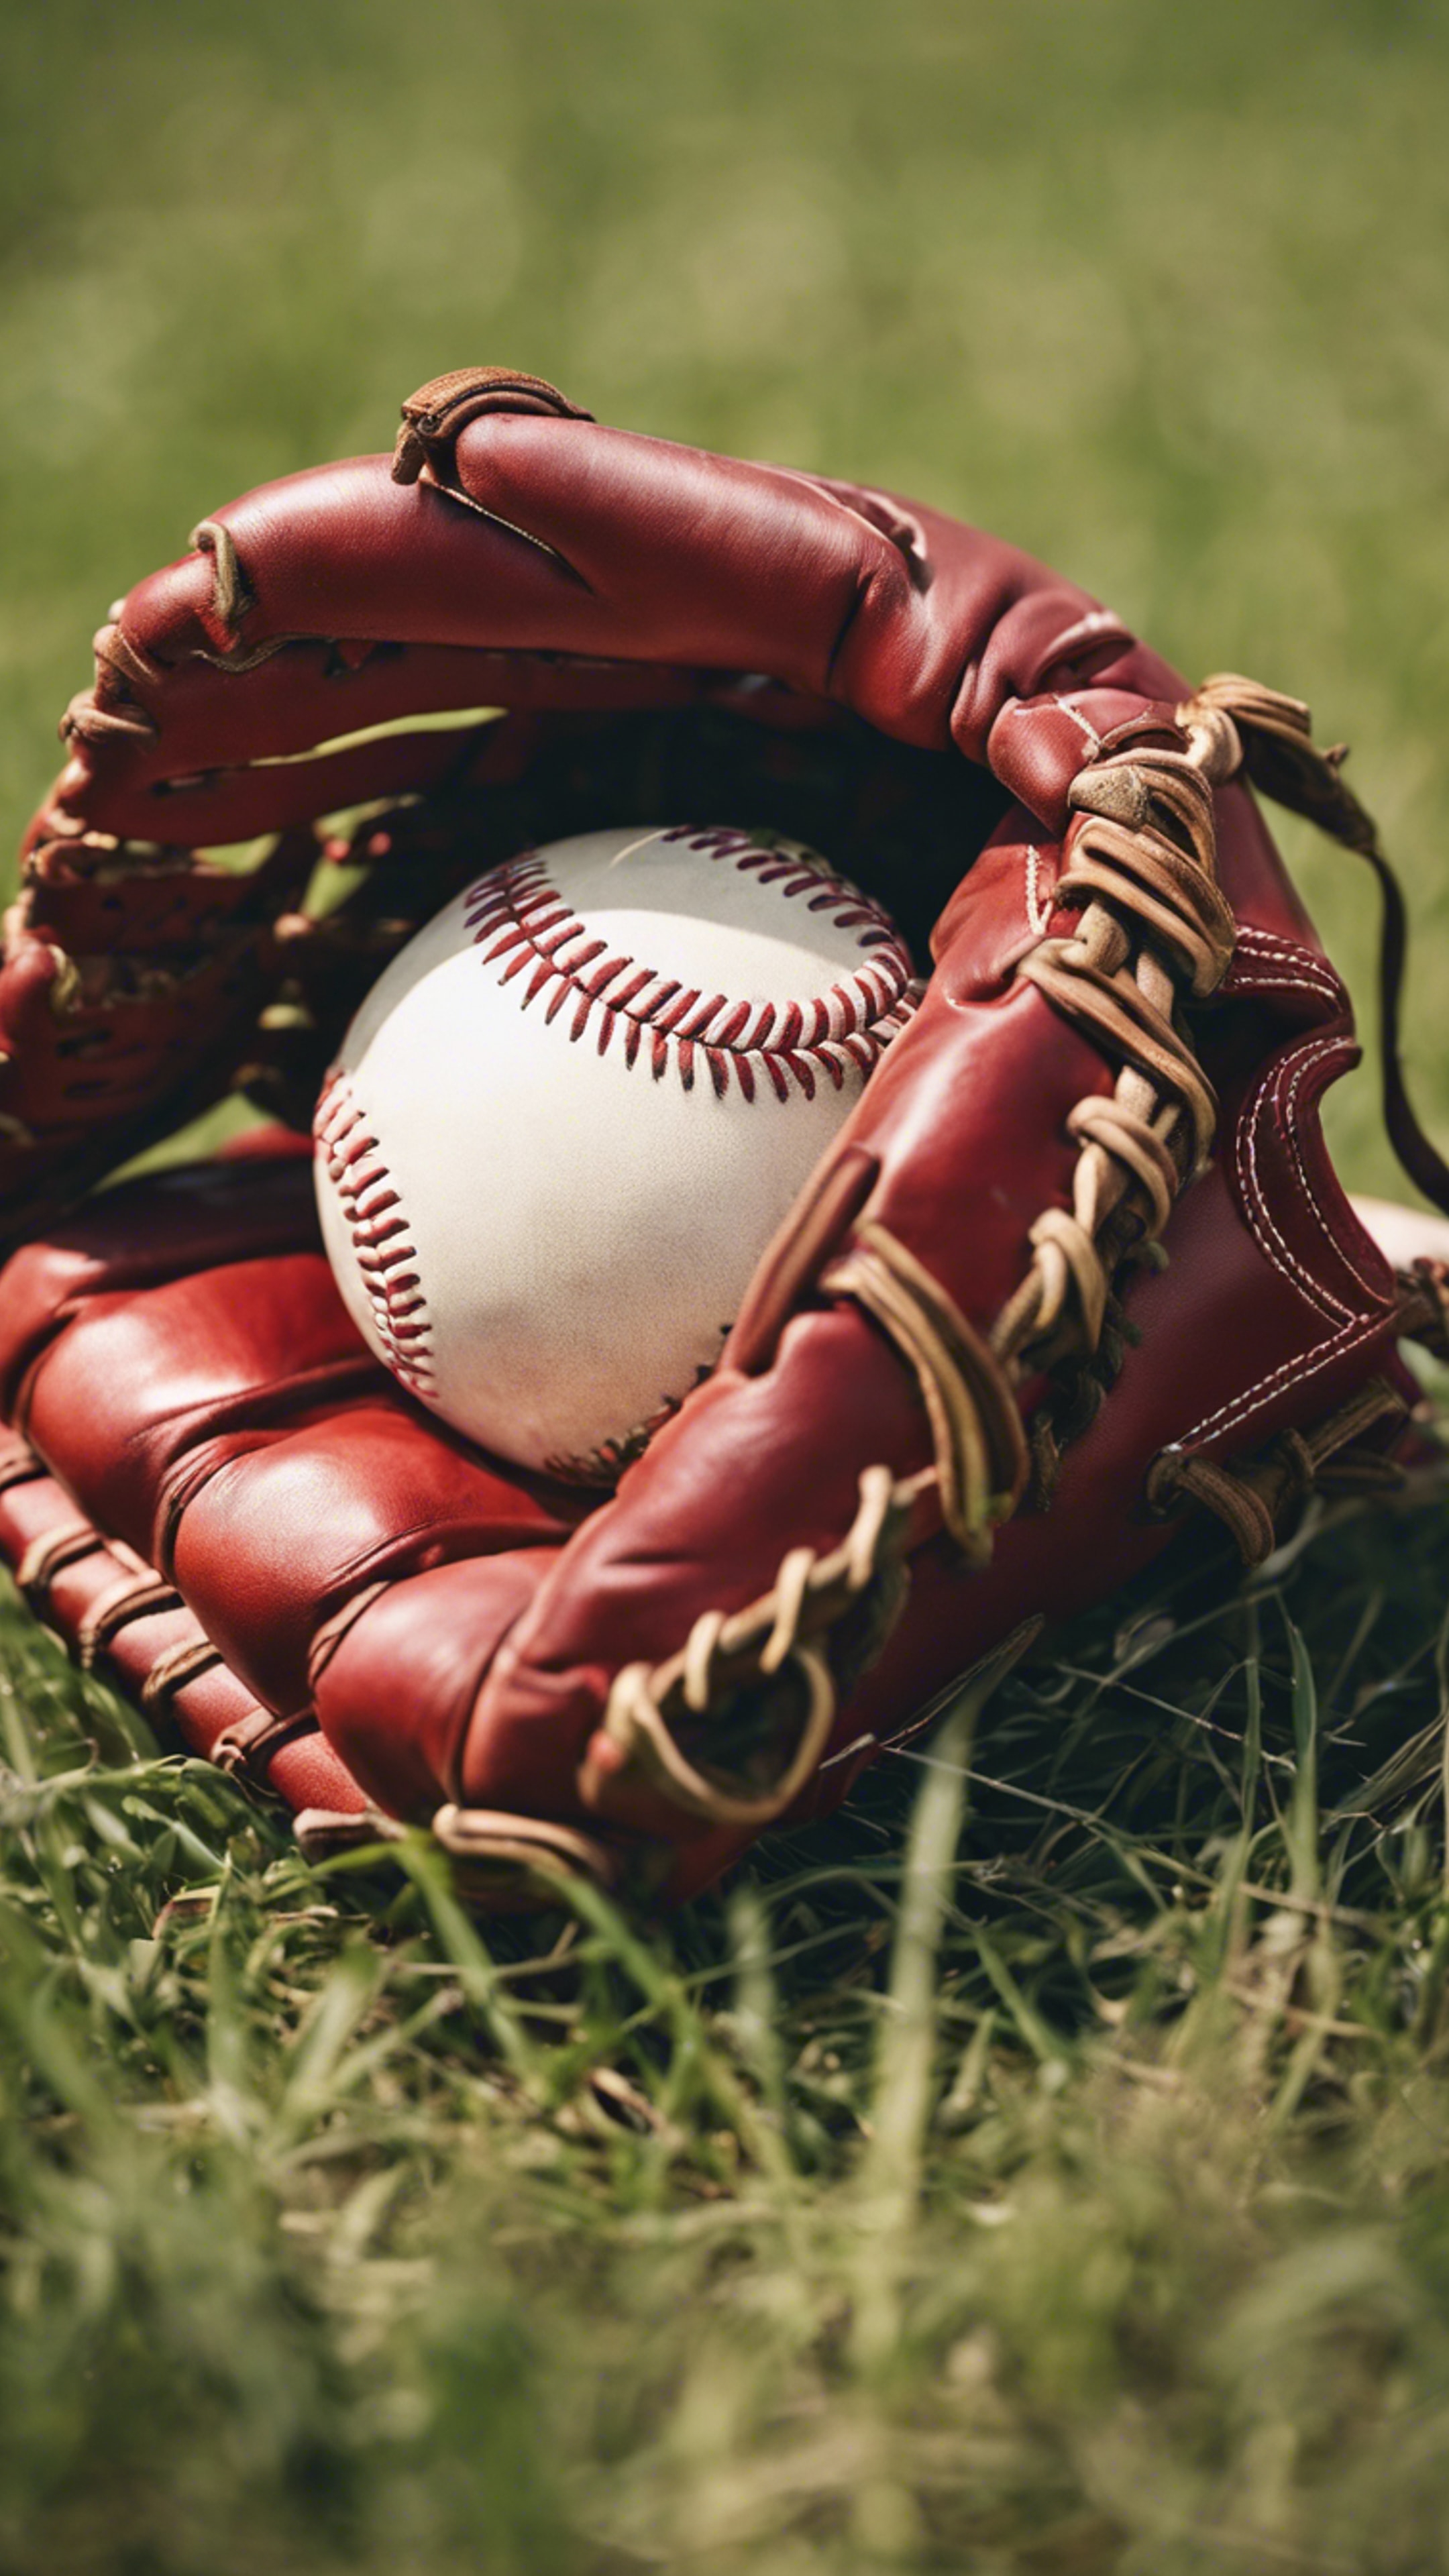 A striking red leather baseball glove on a grassy field right after a game. Hình nền[10102f7c198241d6b5bd]